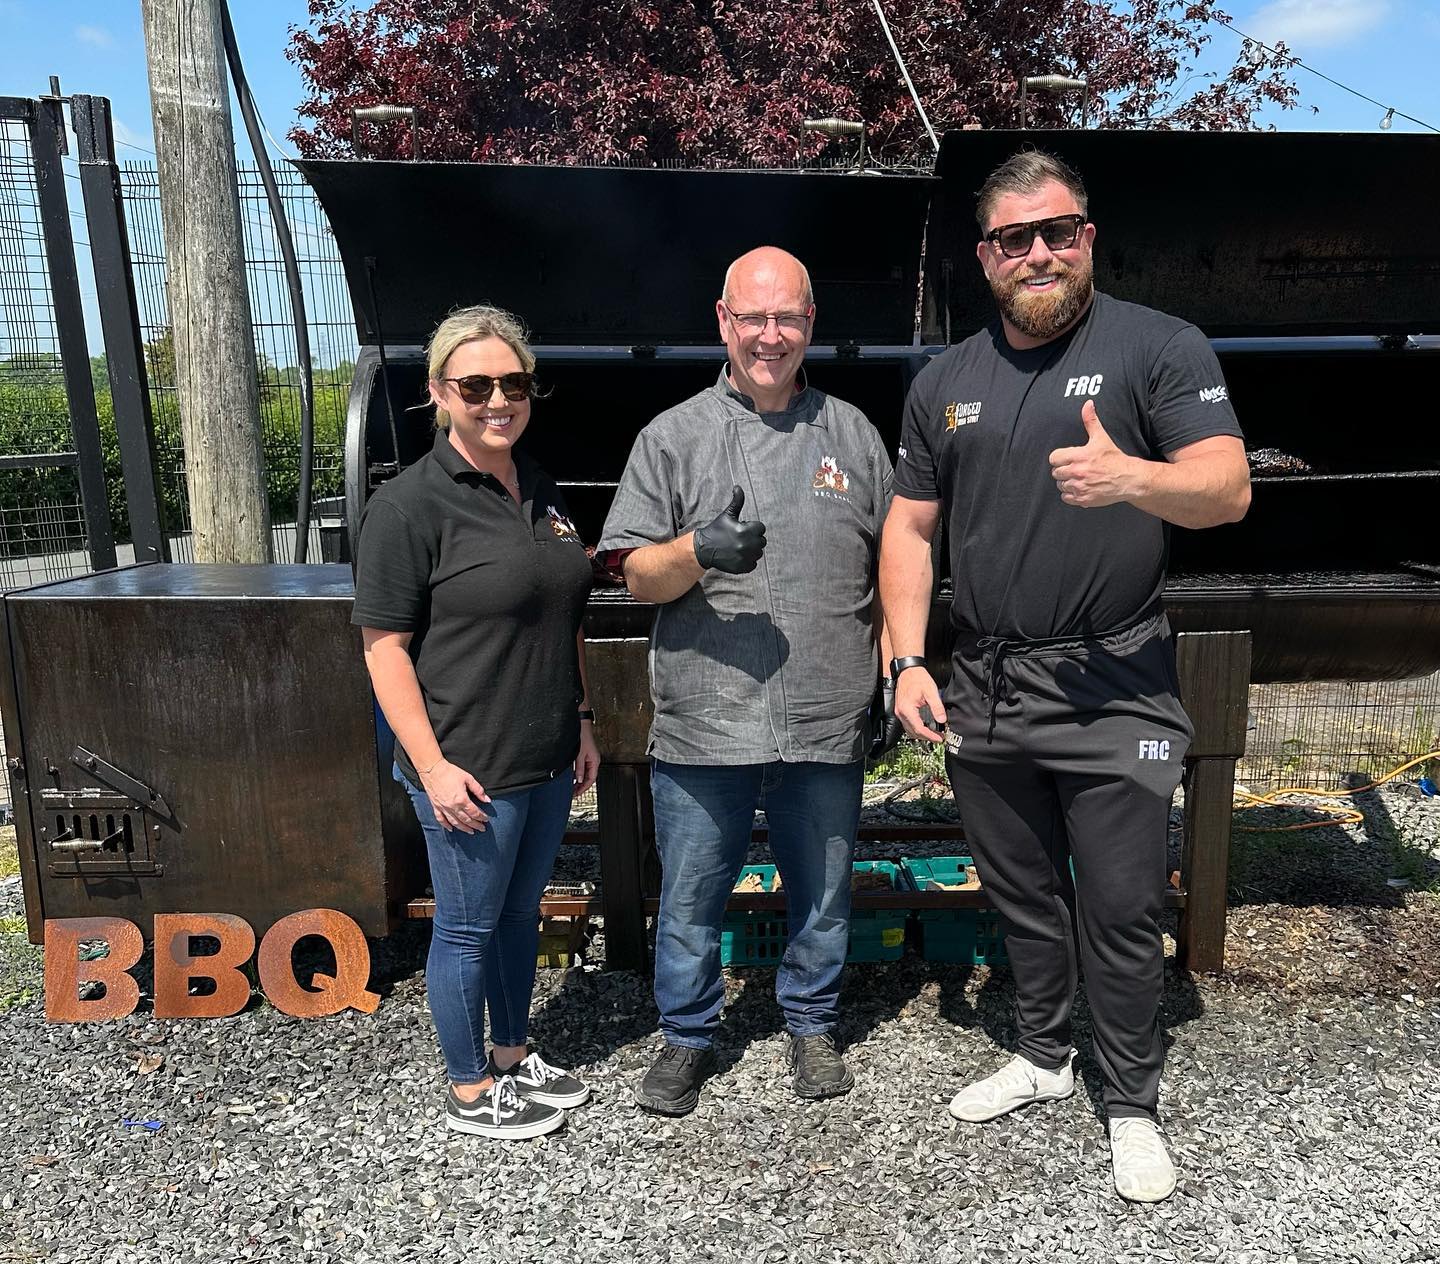 Portadown BBQ spot Holy Smokes gets perfect review